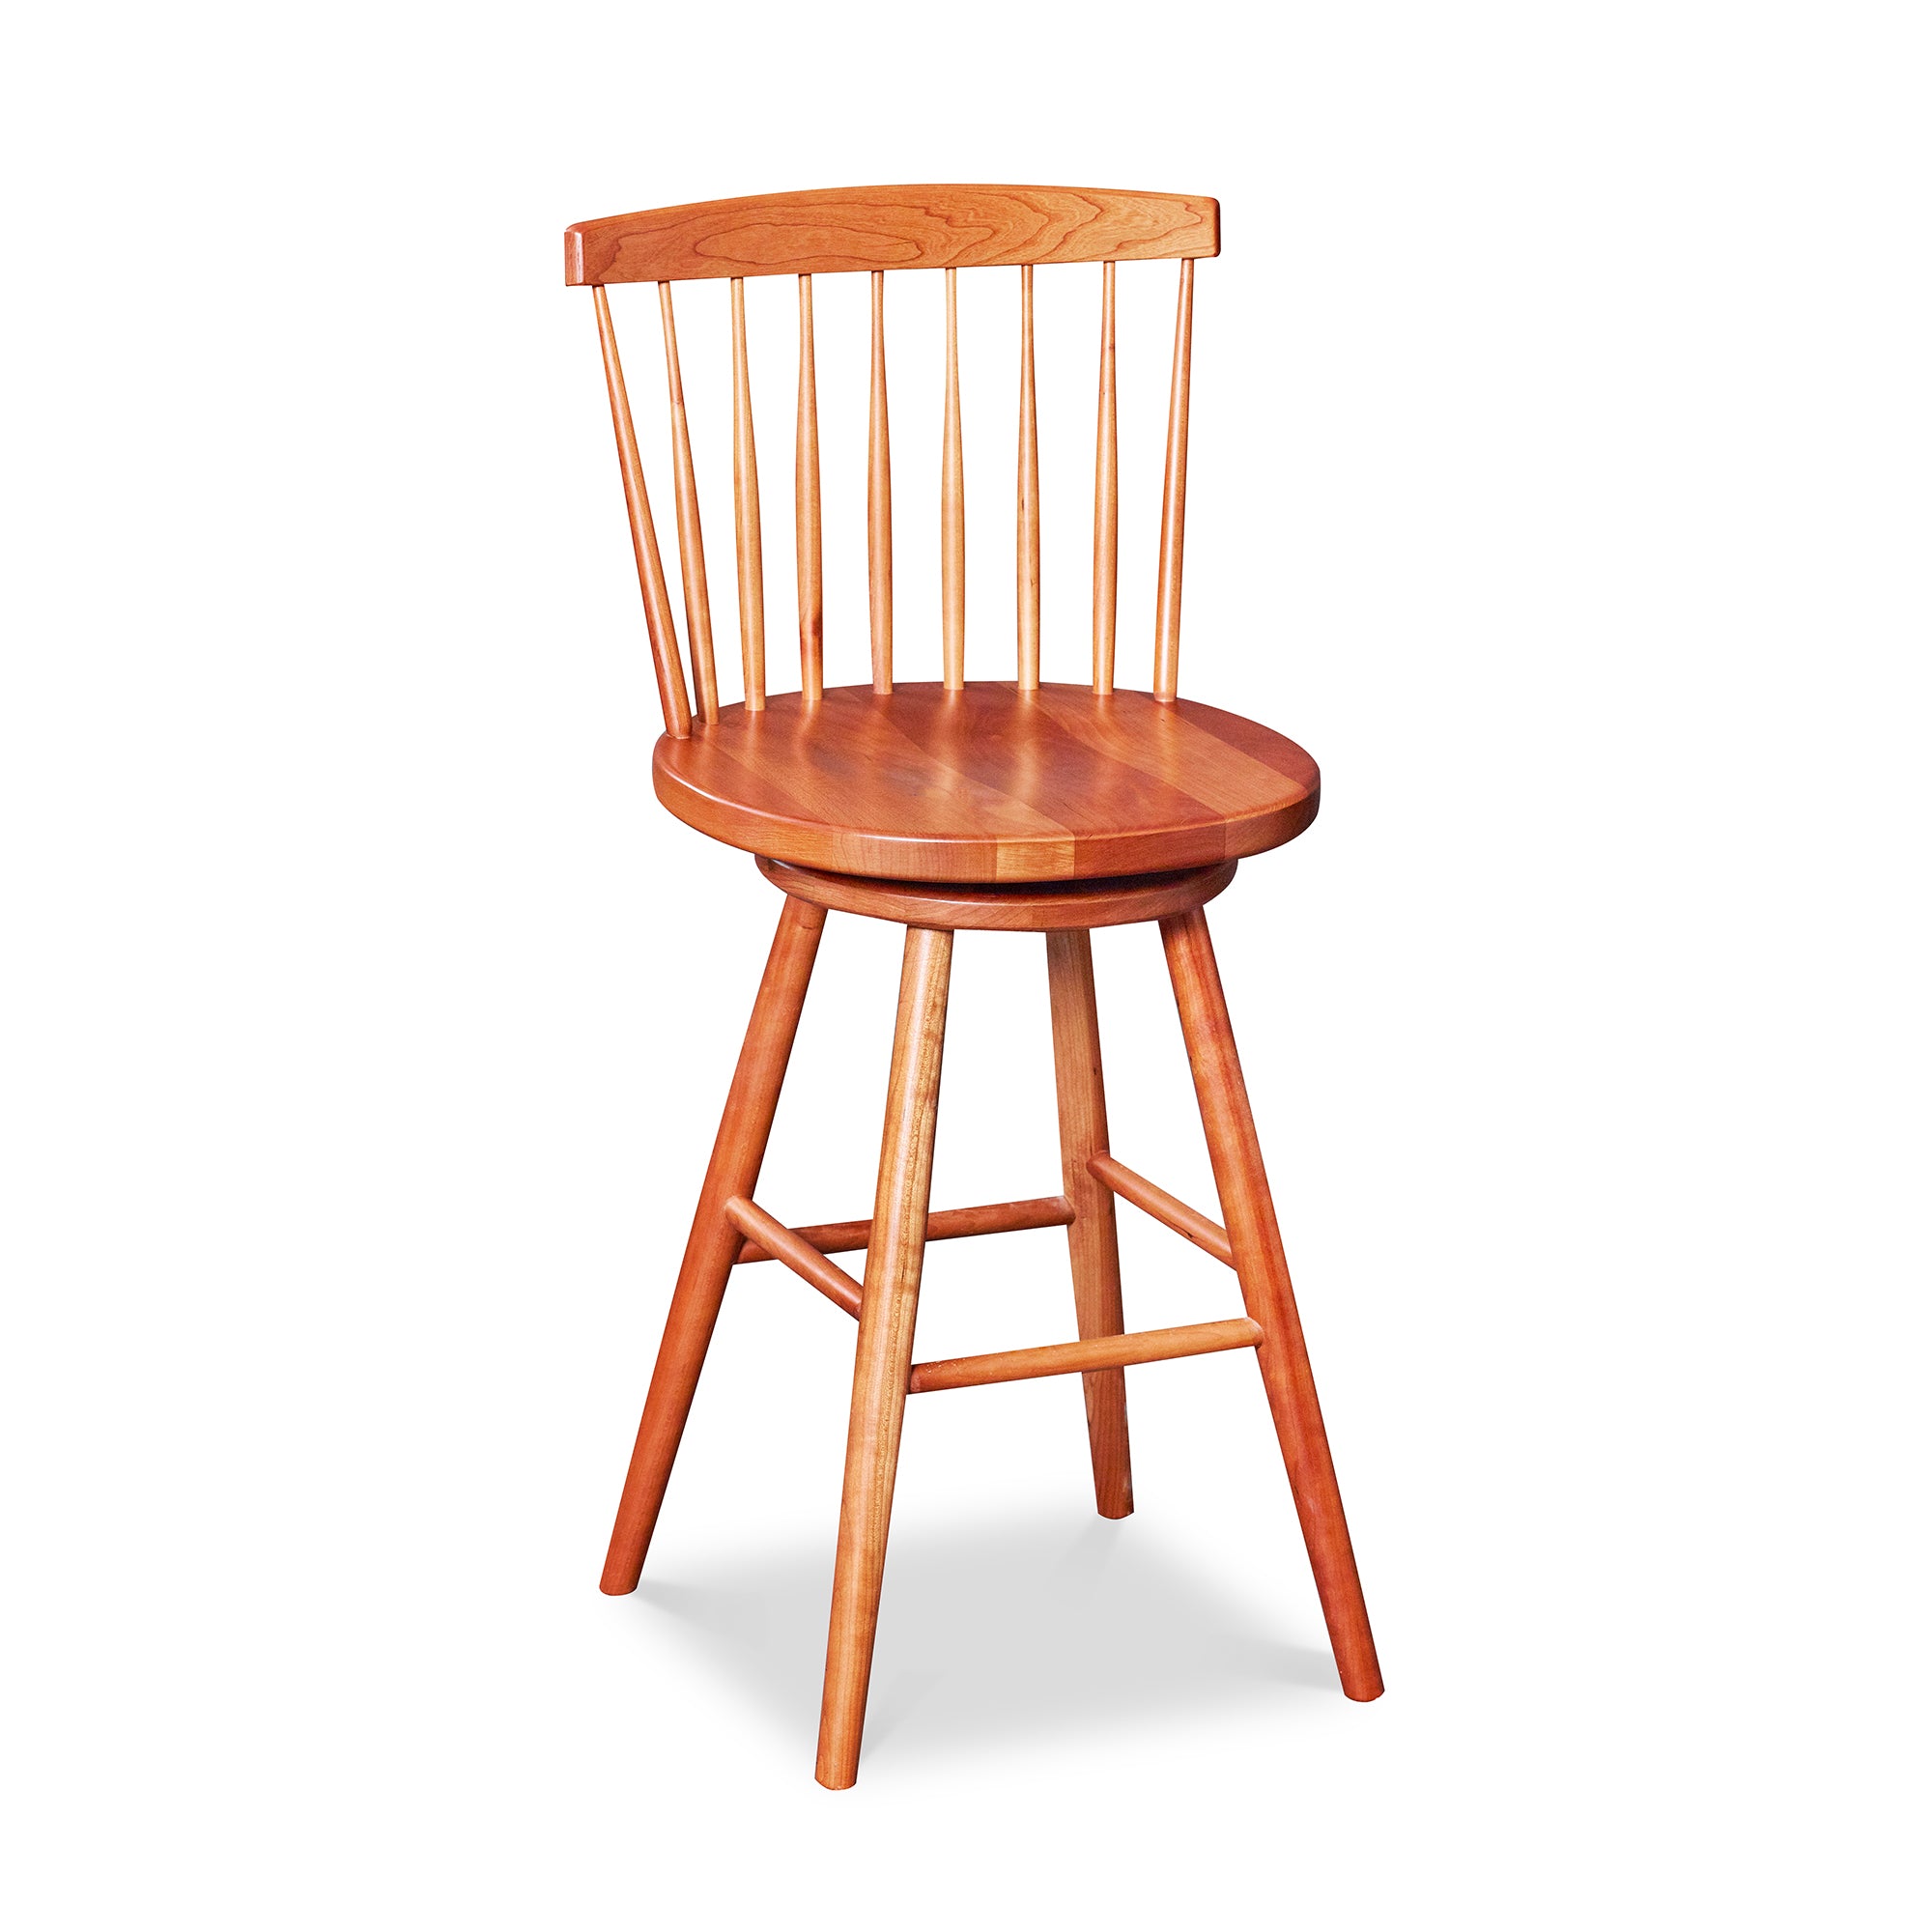 Cherry swivel counter stool with spindle back, from Maine's Chilton Furniture Co.